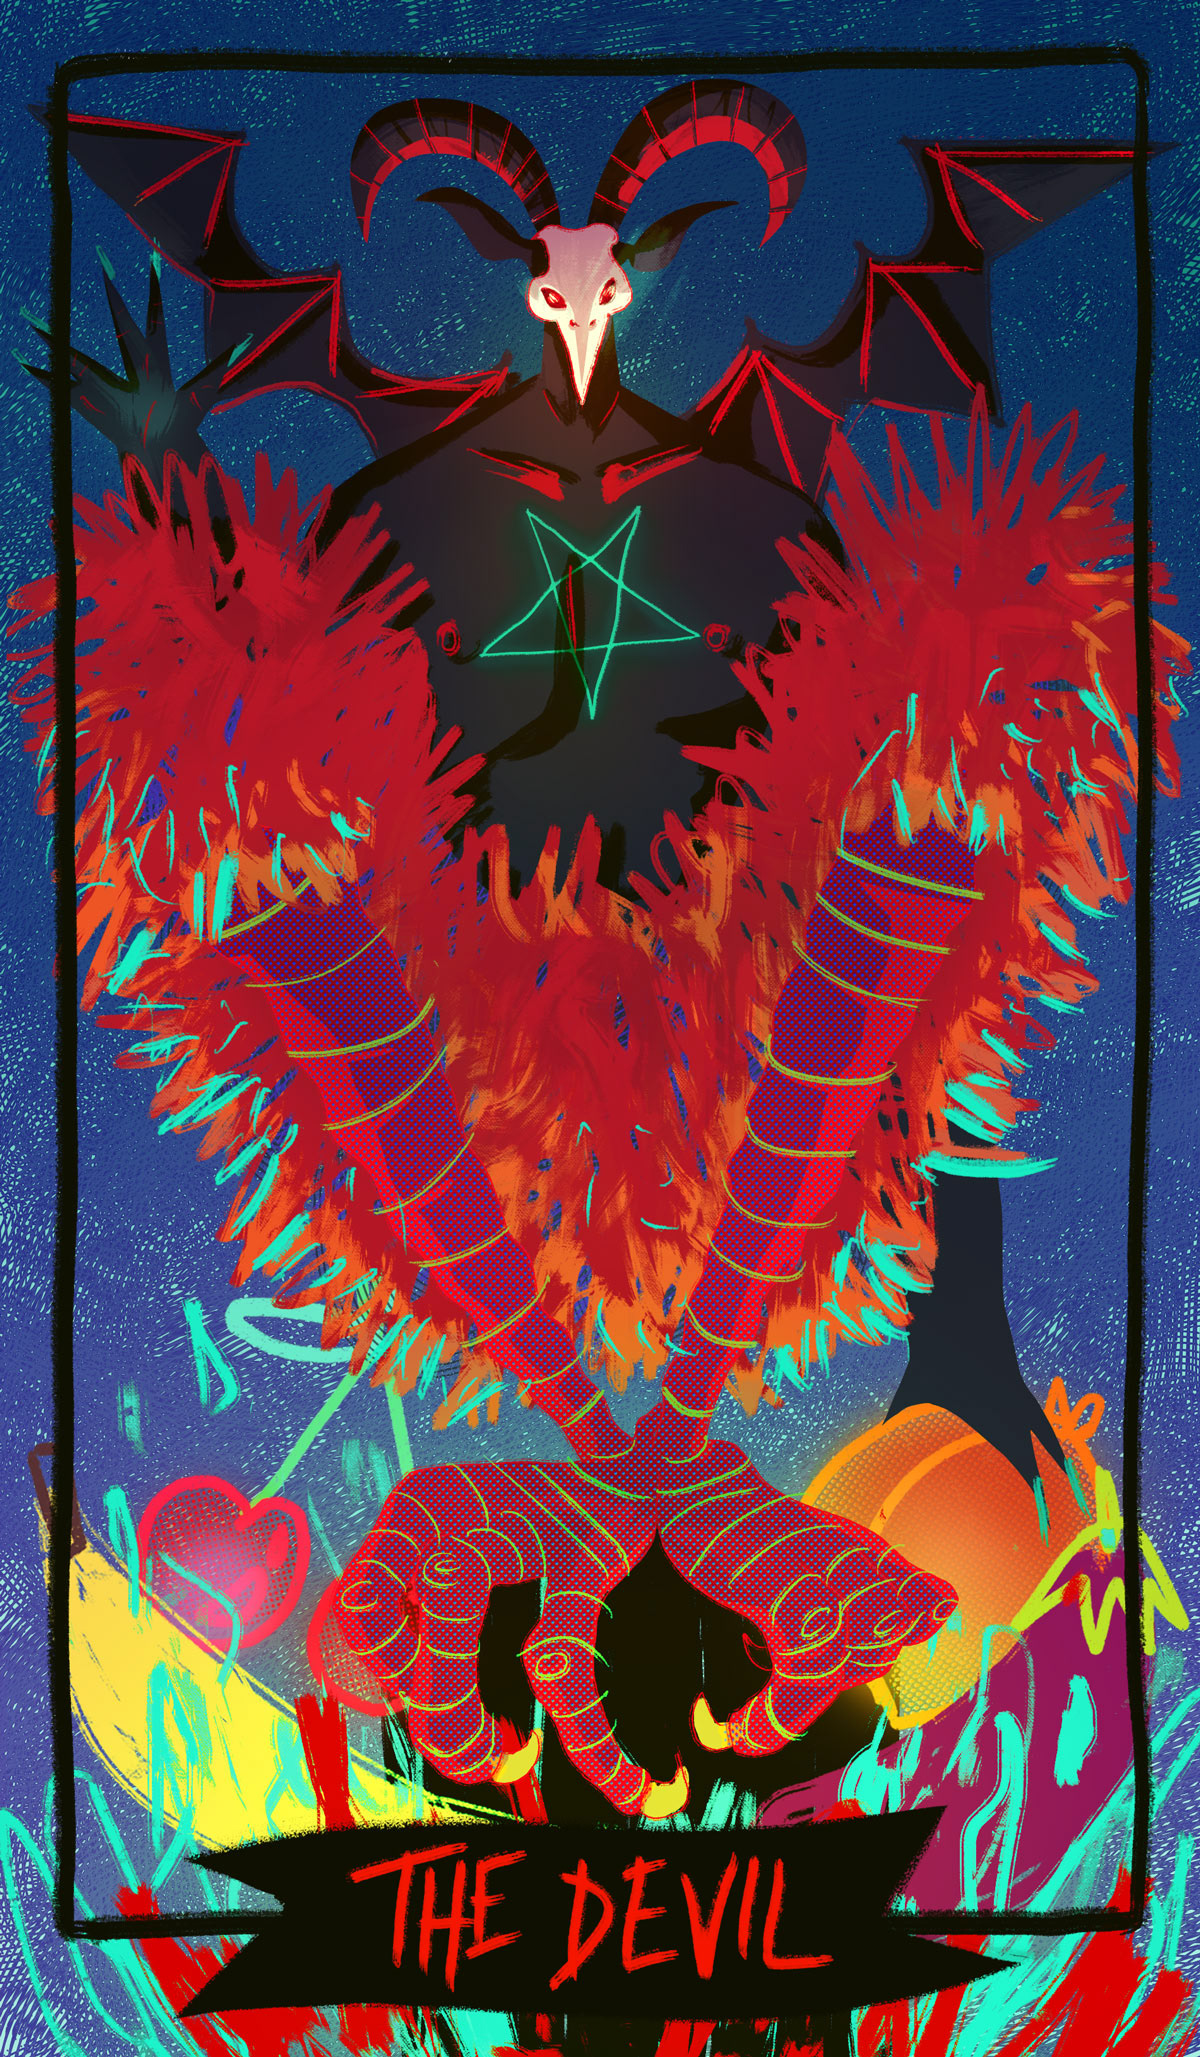 Art by Edanur Kuntman, her version of the Devil Card, a evilish looking creature sitting on fruits that are usually associated with sex.